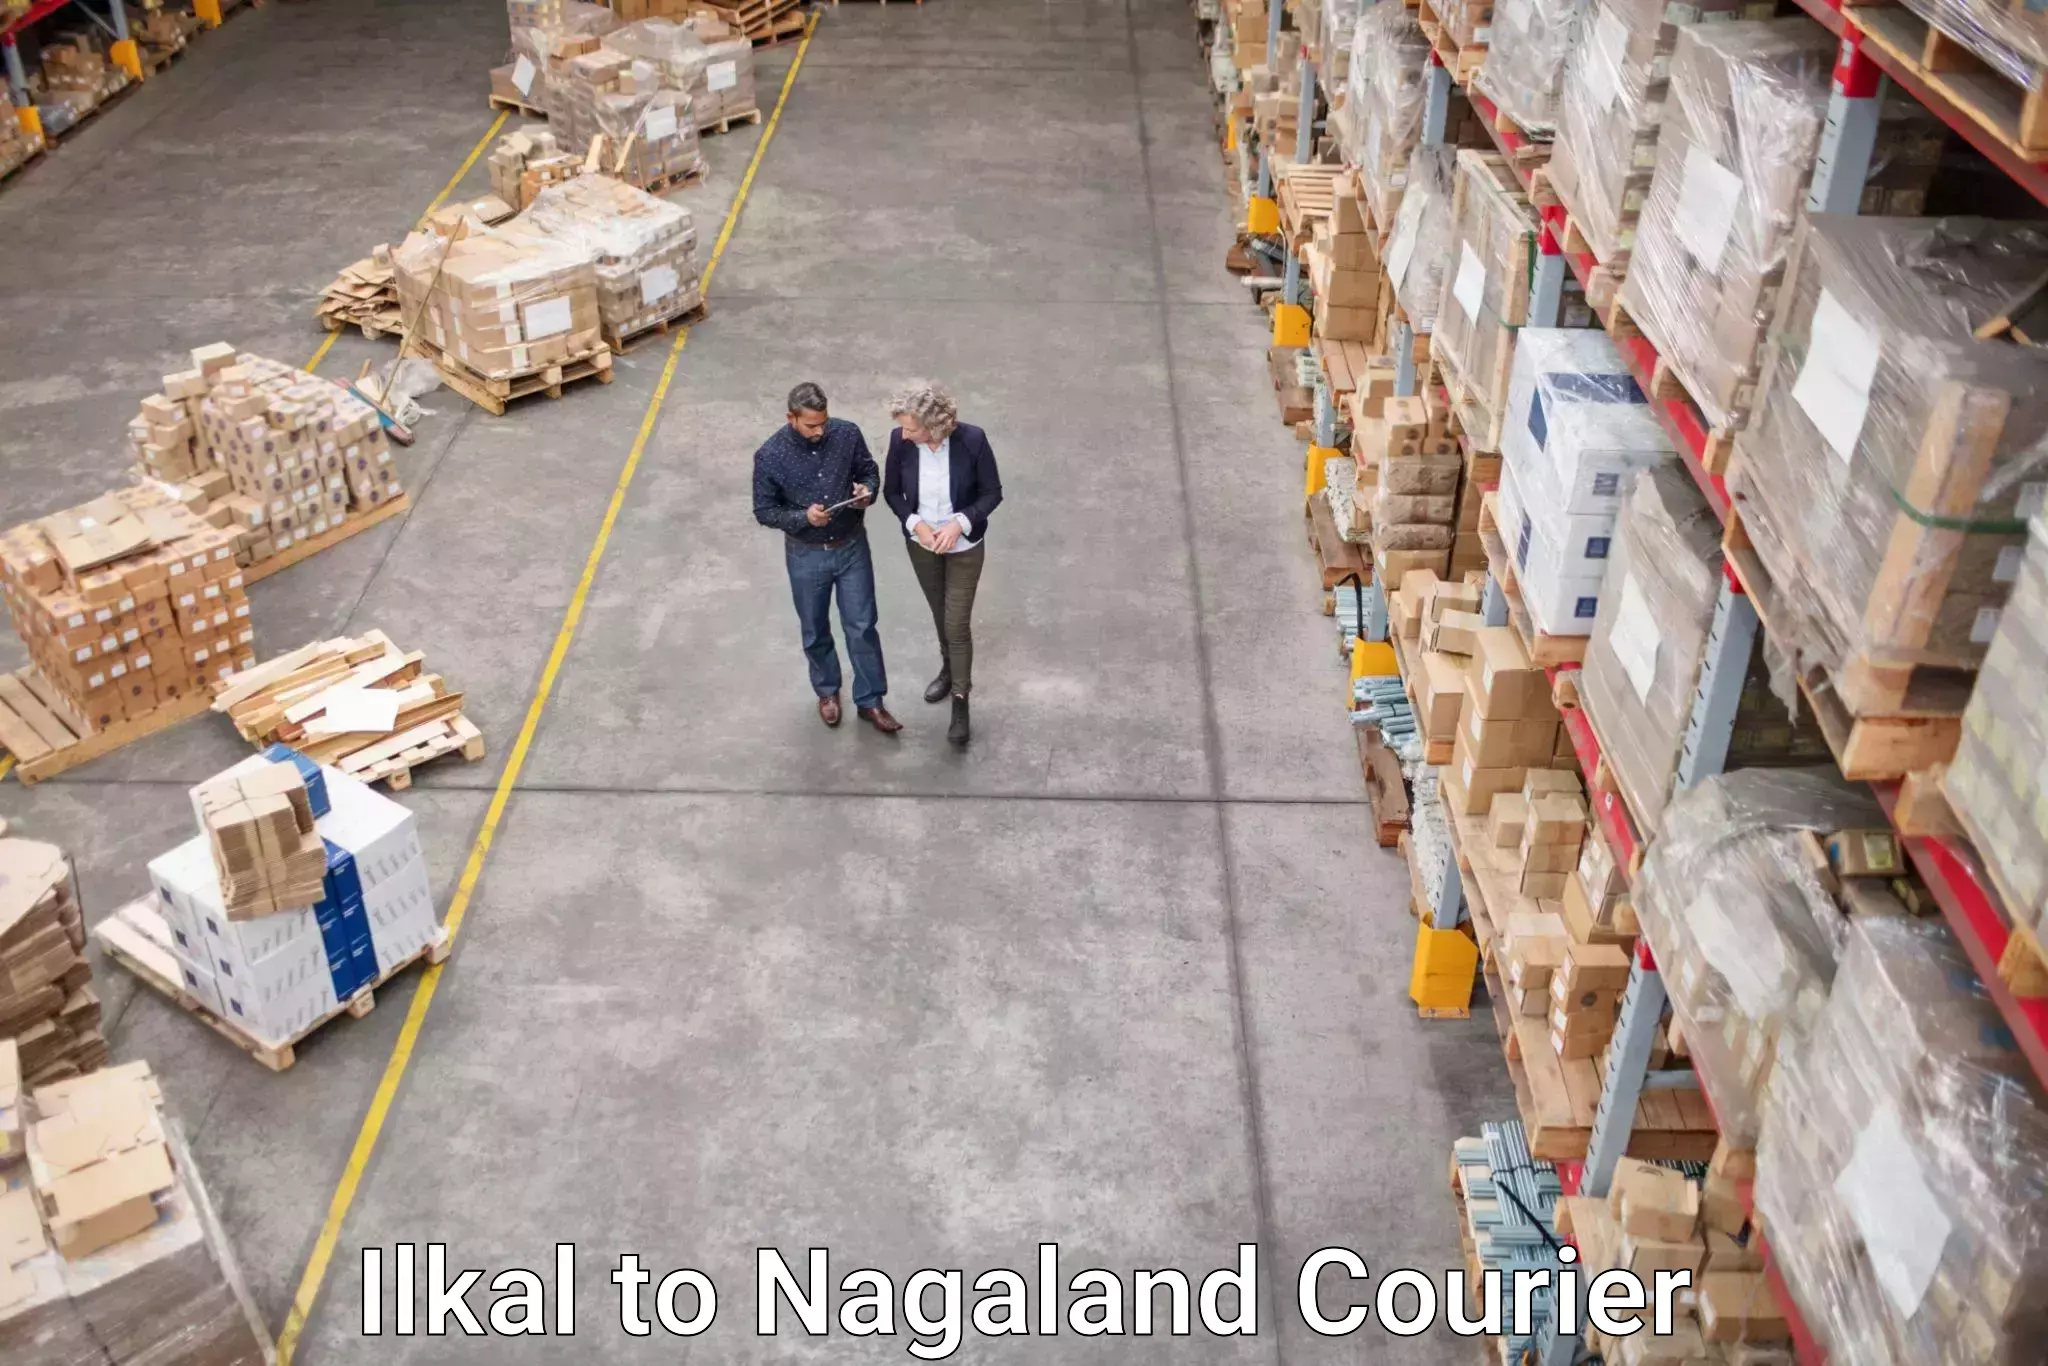 Express delivery network Ilkal to Nagaland